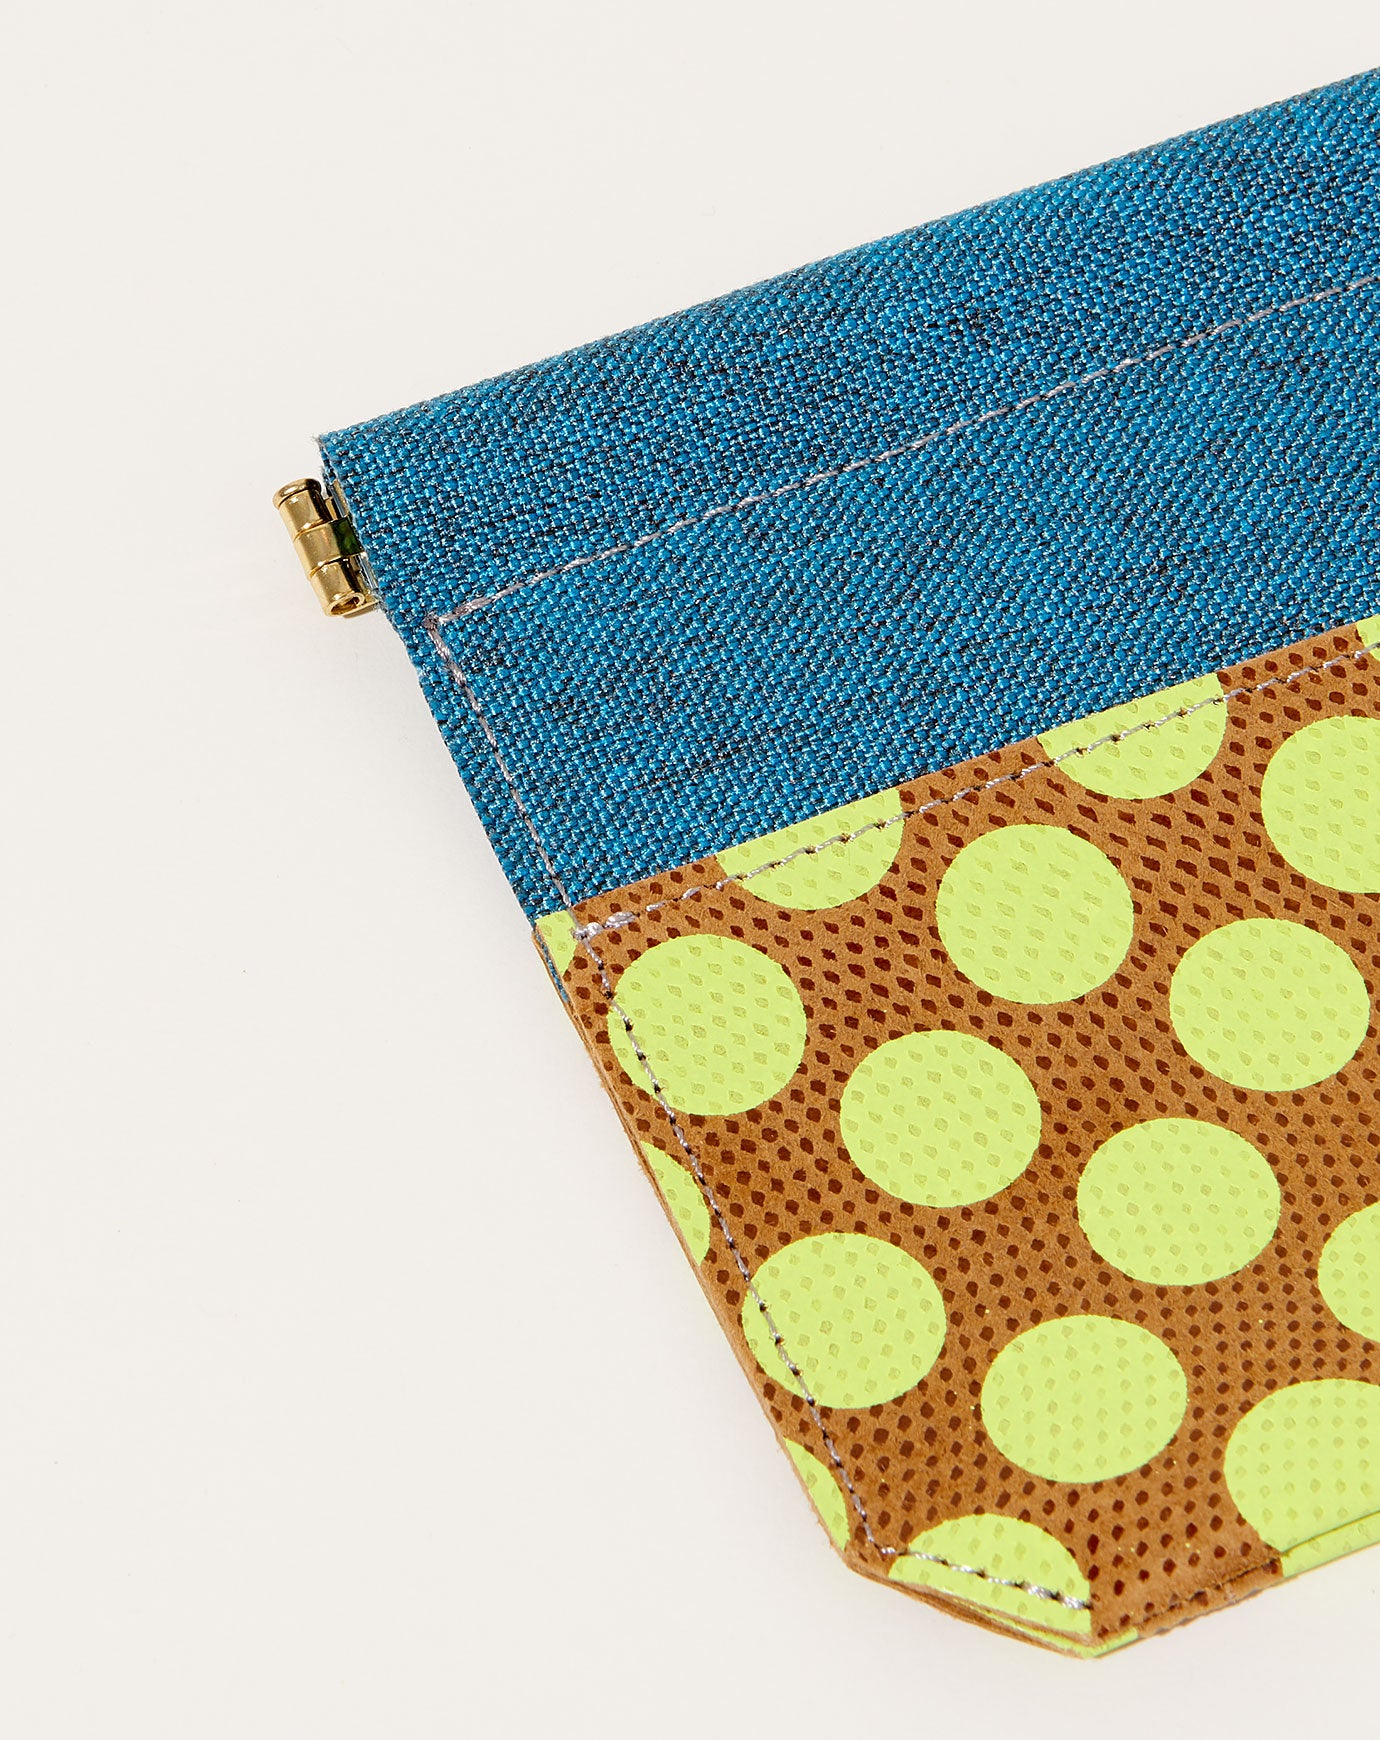 Carmine Ecology Leather Mini Pouch in Neon Yellow